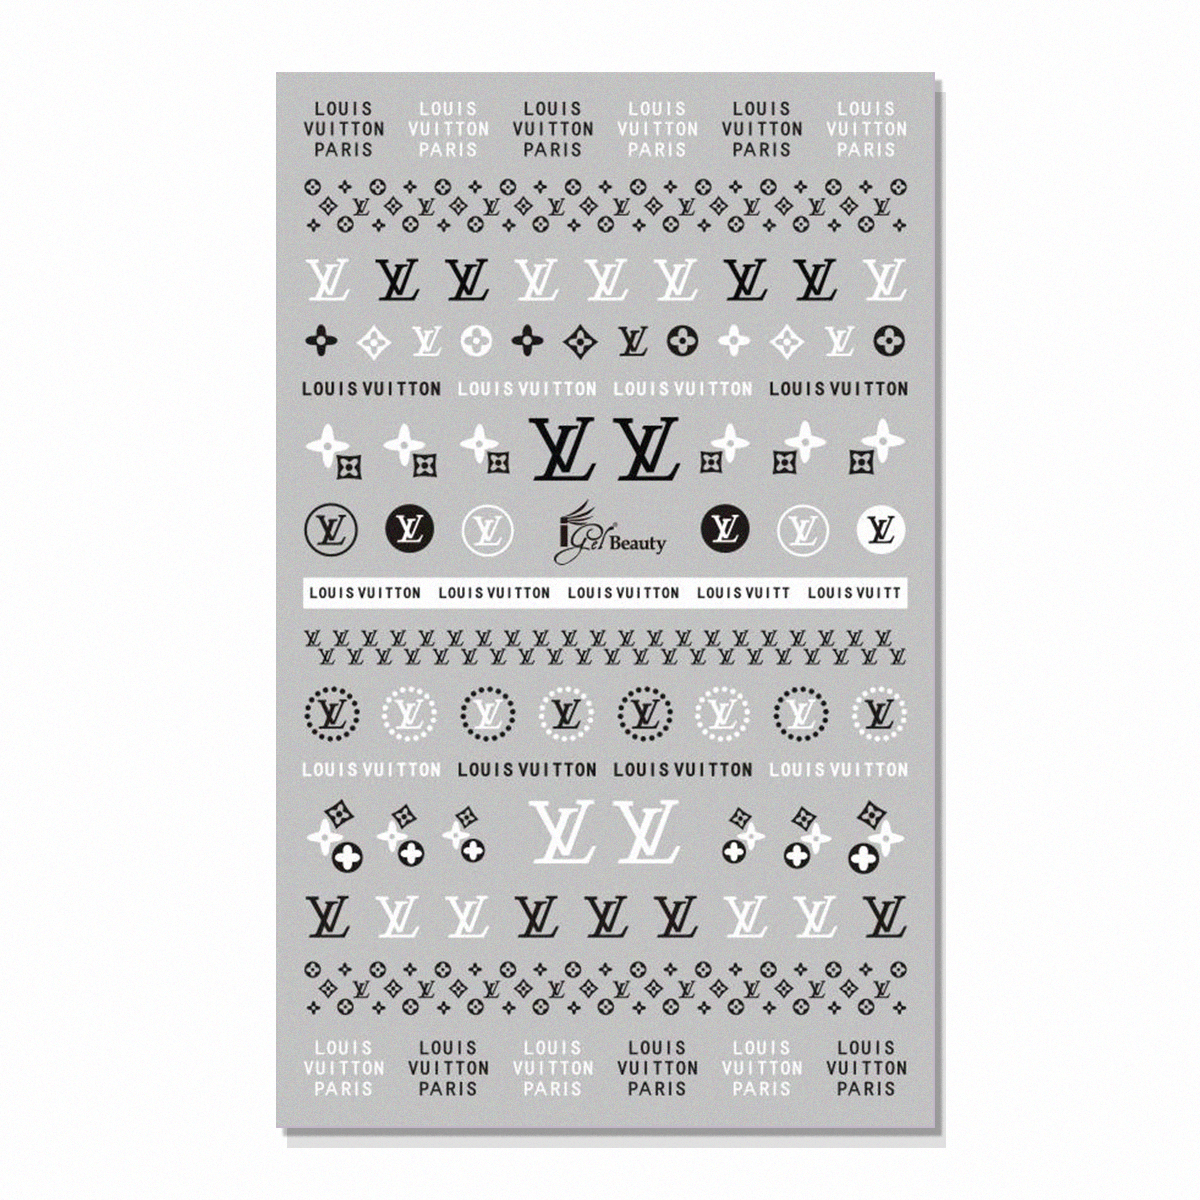 Nail Stickers-Letter – Vettsy